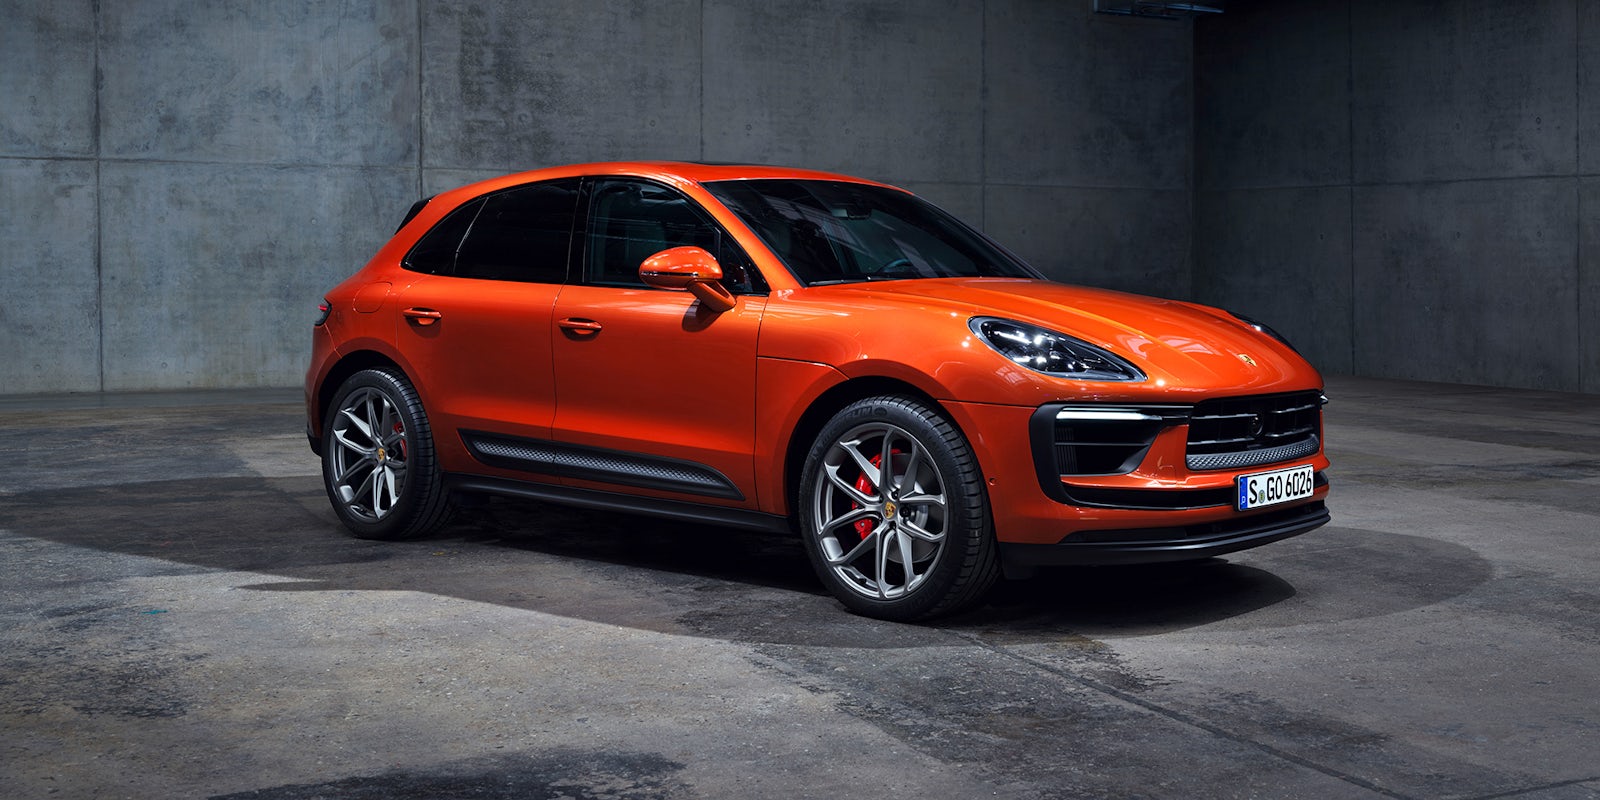 2022 Porsche Macan facelift revealed: price, specs and release date | carwow